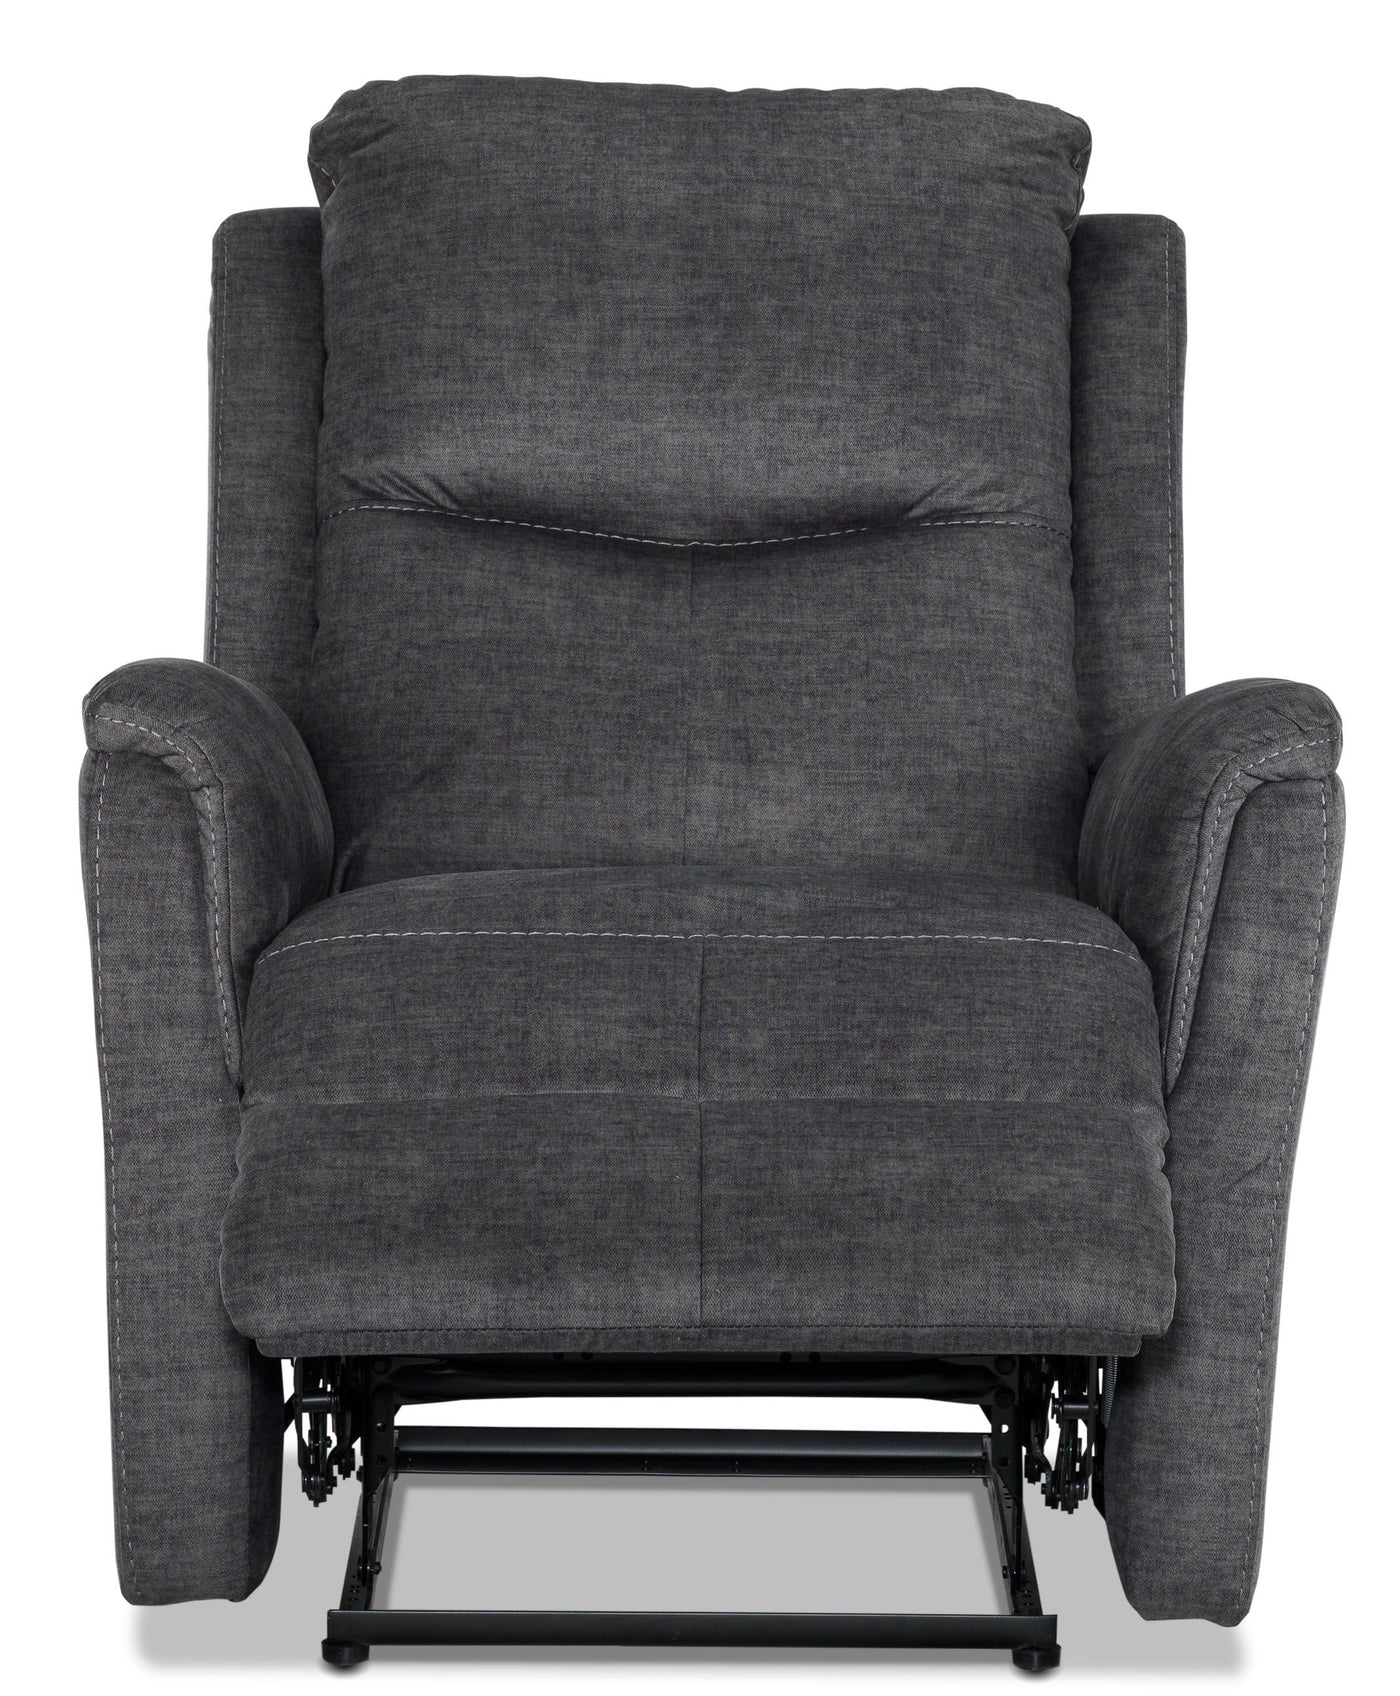 Grayson Recliner - Charcoal